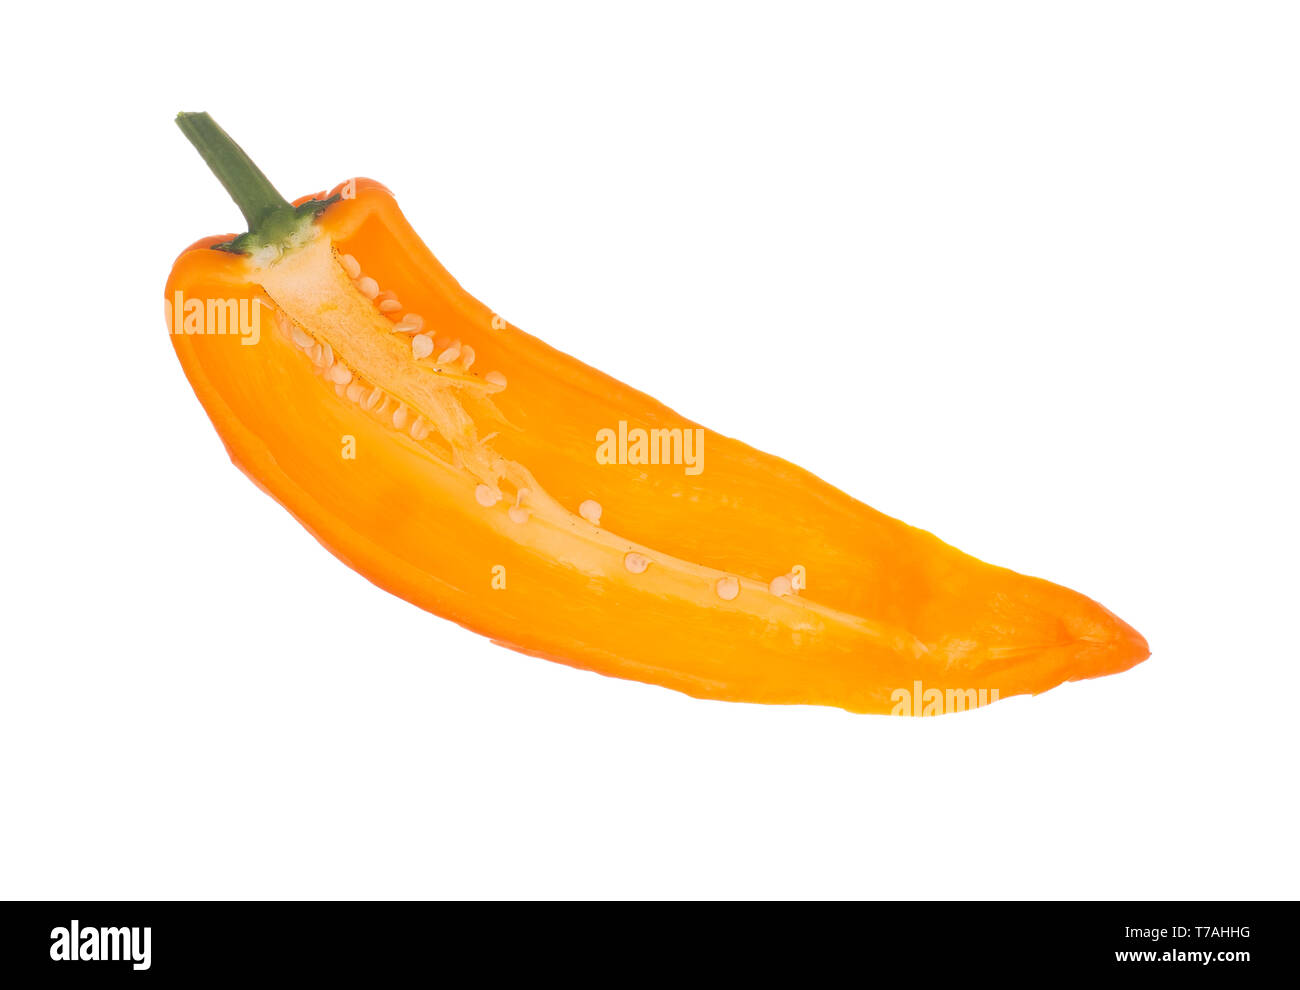 Yellow colour Cubanelle sweet pepper cut open to reveal seeds inside isolated on white background. Capsicum annuum. Aka Italian frying pepper. Stock Photo